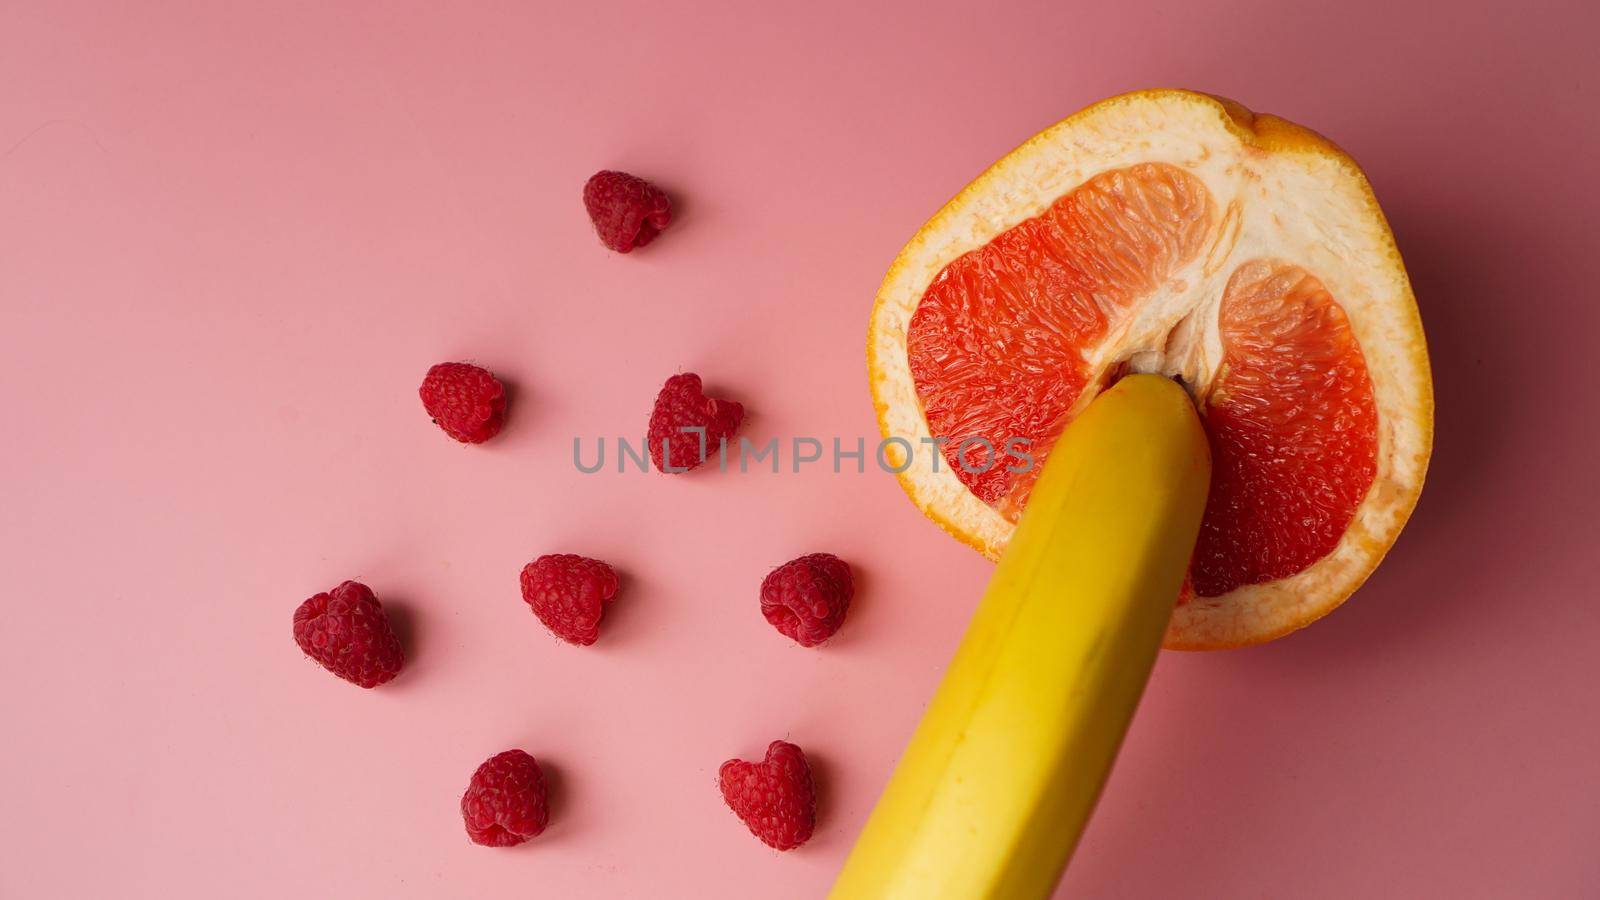 Banana with red grapefruit and raspberries on pink background, sex concept